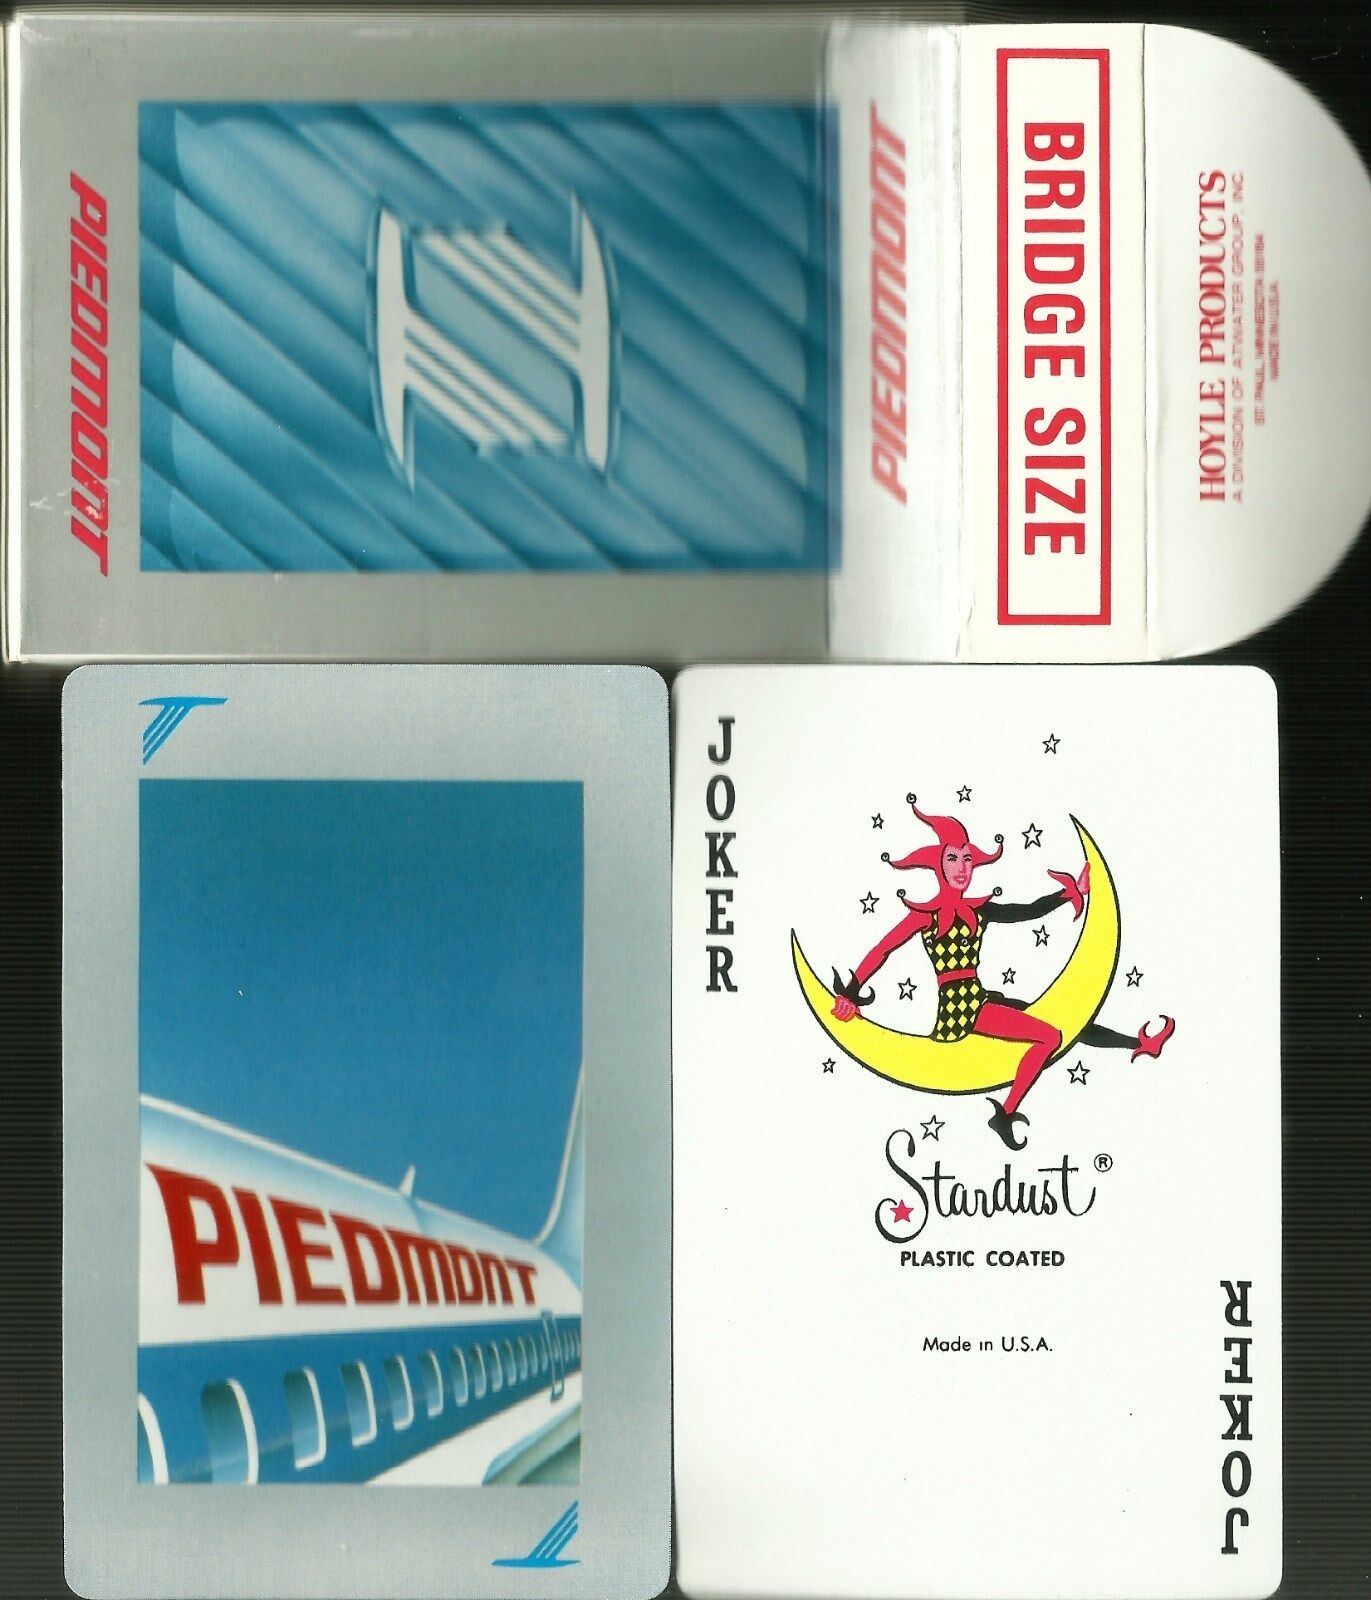 Vintage Piedmont Airlines 54 Playing Cards HOYLE USA plastic coated bridge size